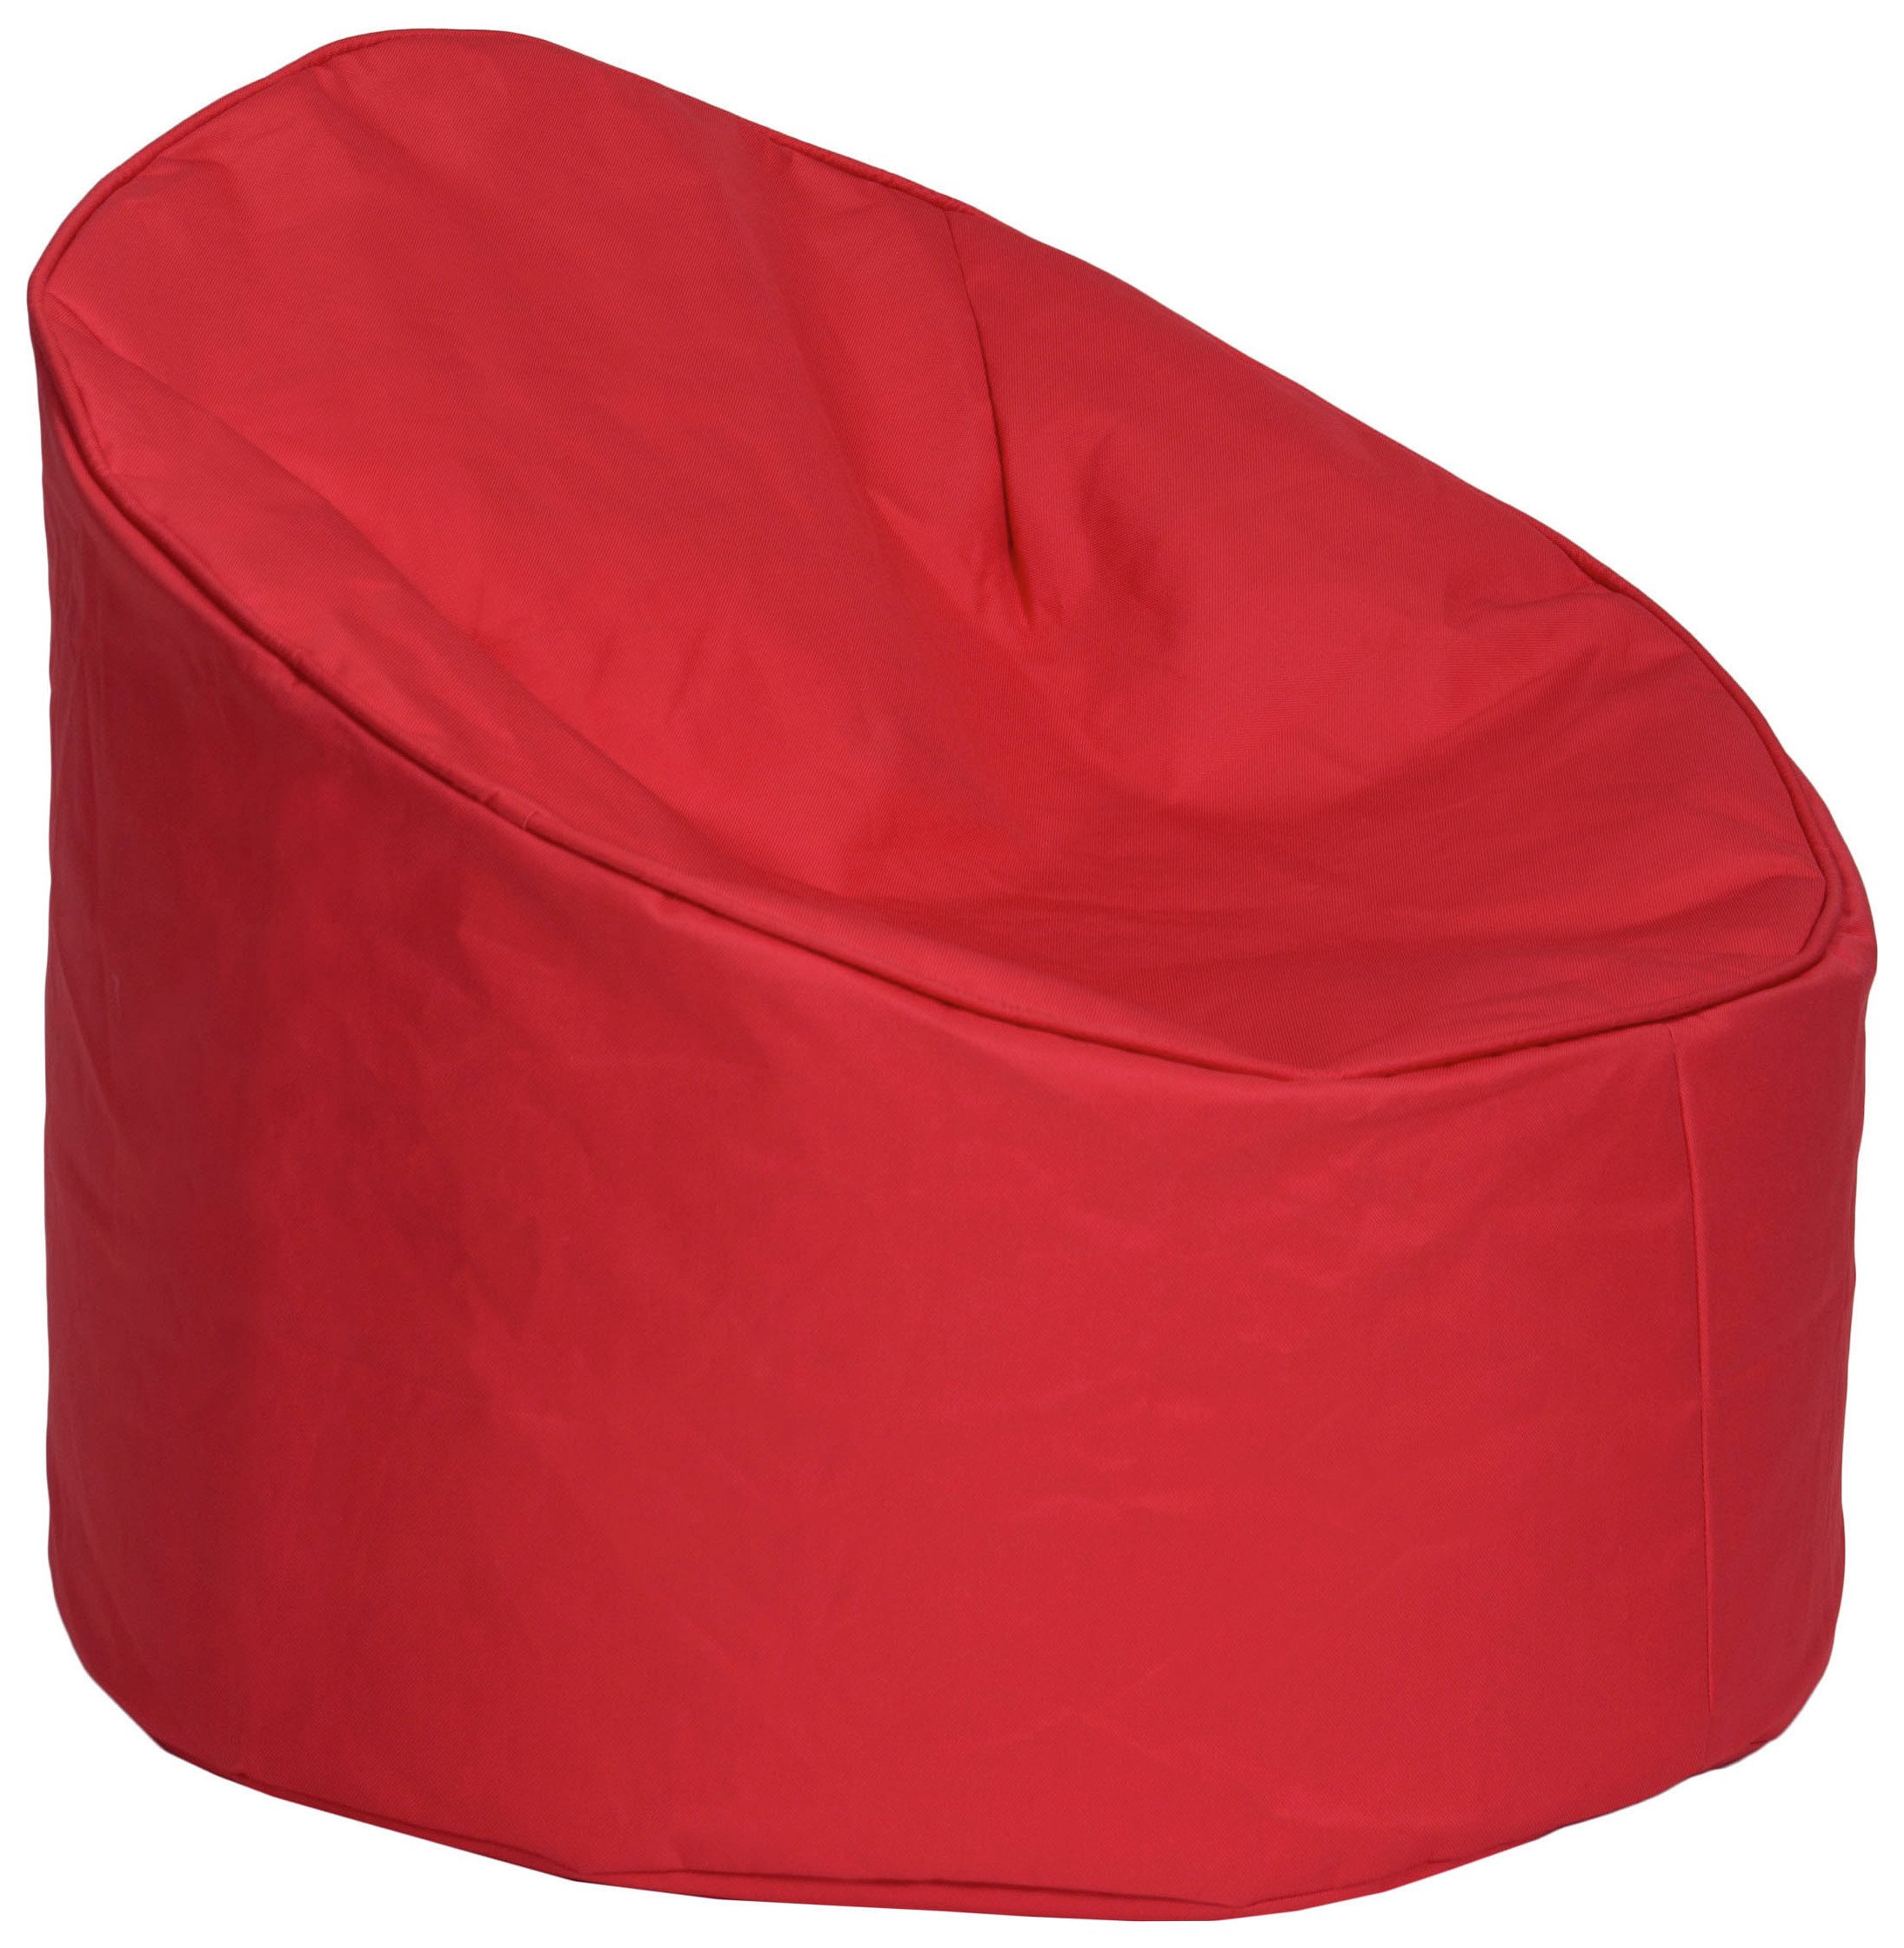 Kaikoo Cool Chill Outdoor Chair - Red